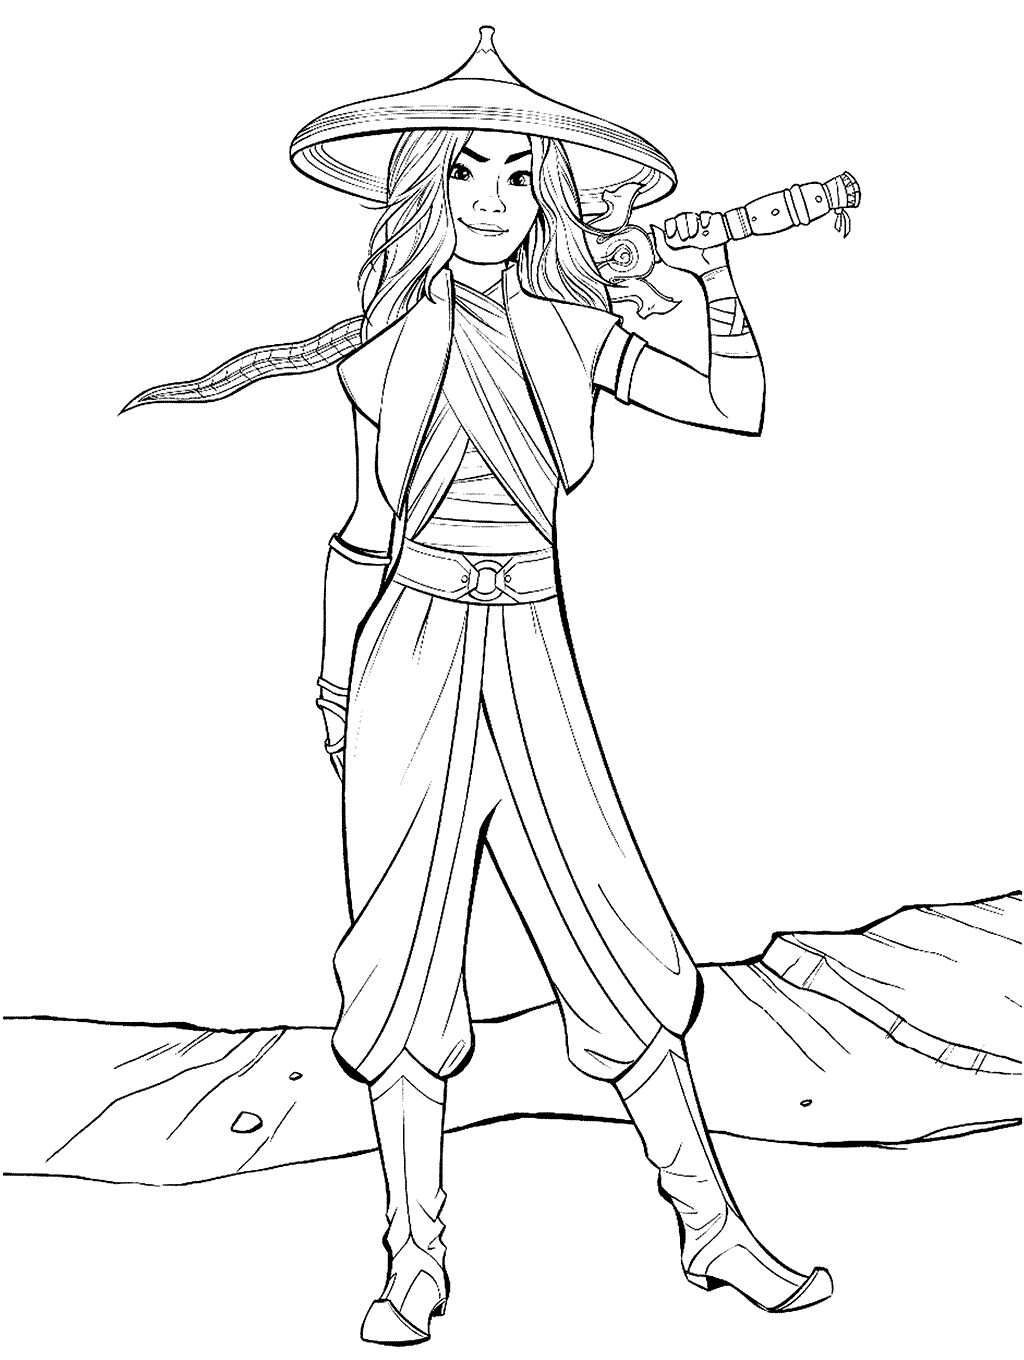 Warrior Raya holds her sword Coloring Pages